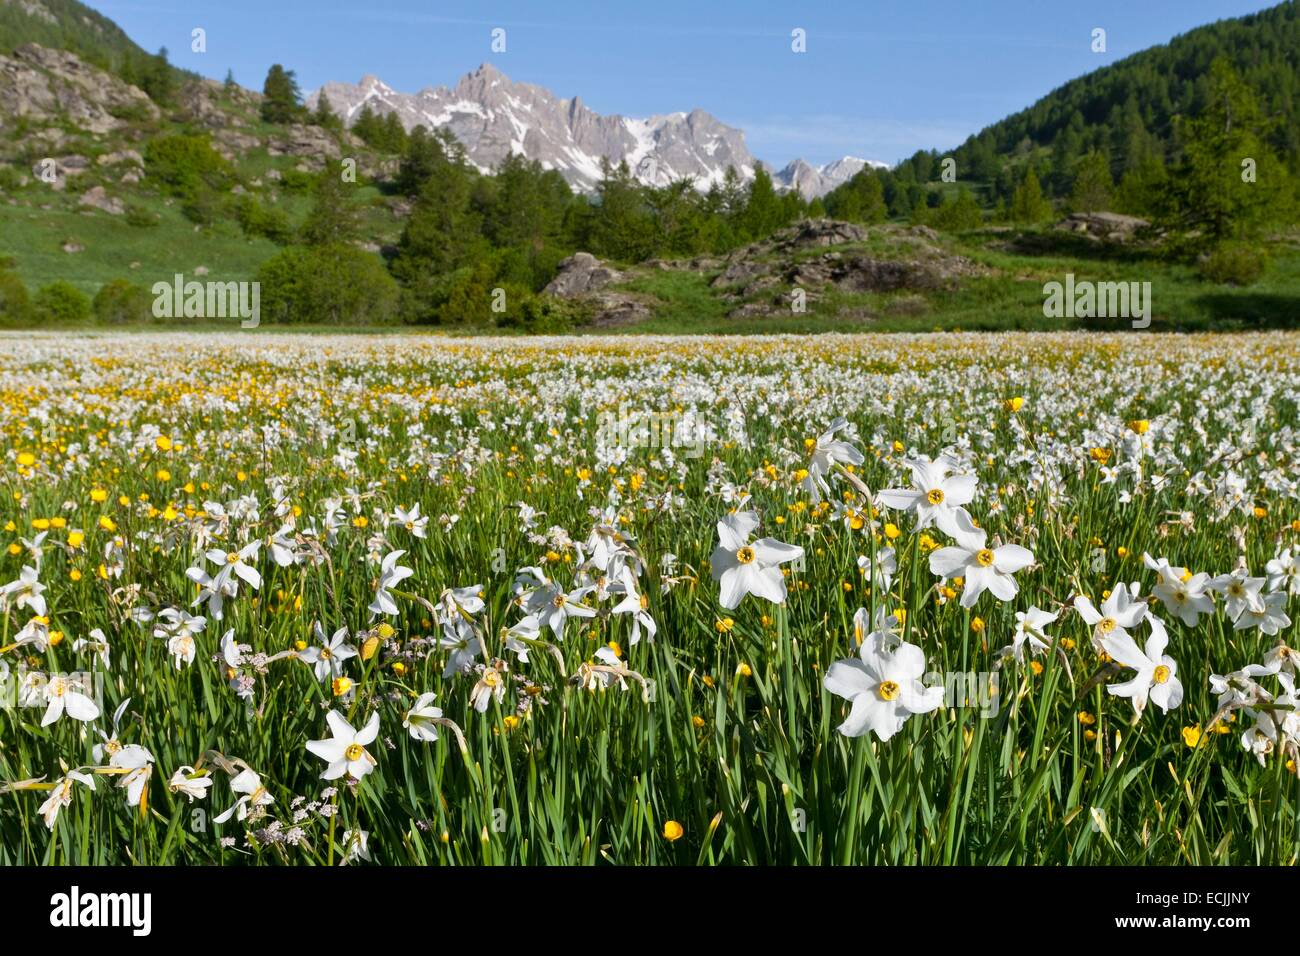 France, Hautes-Alpes, Nevache La Claree valley, daffodils, narcissus family Amaryllidaceae, overlooking the Pointe Cerces (3097m) Stock Photo